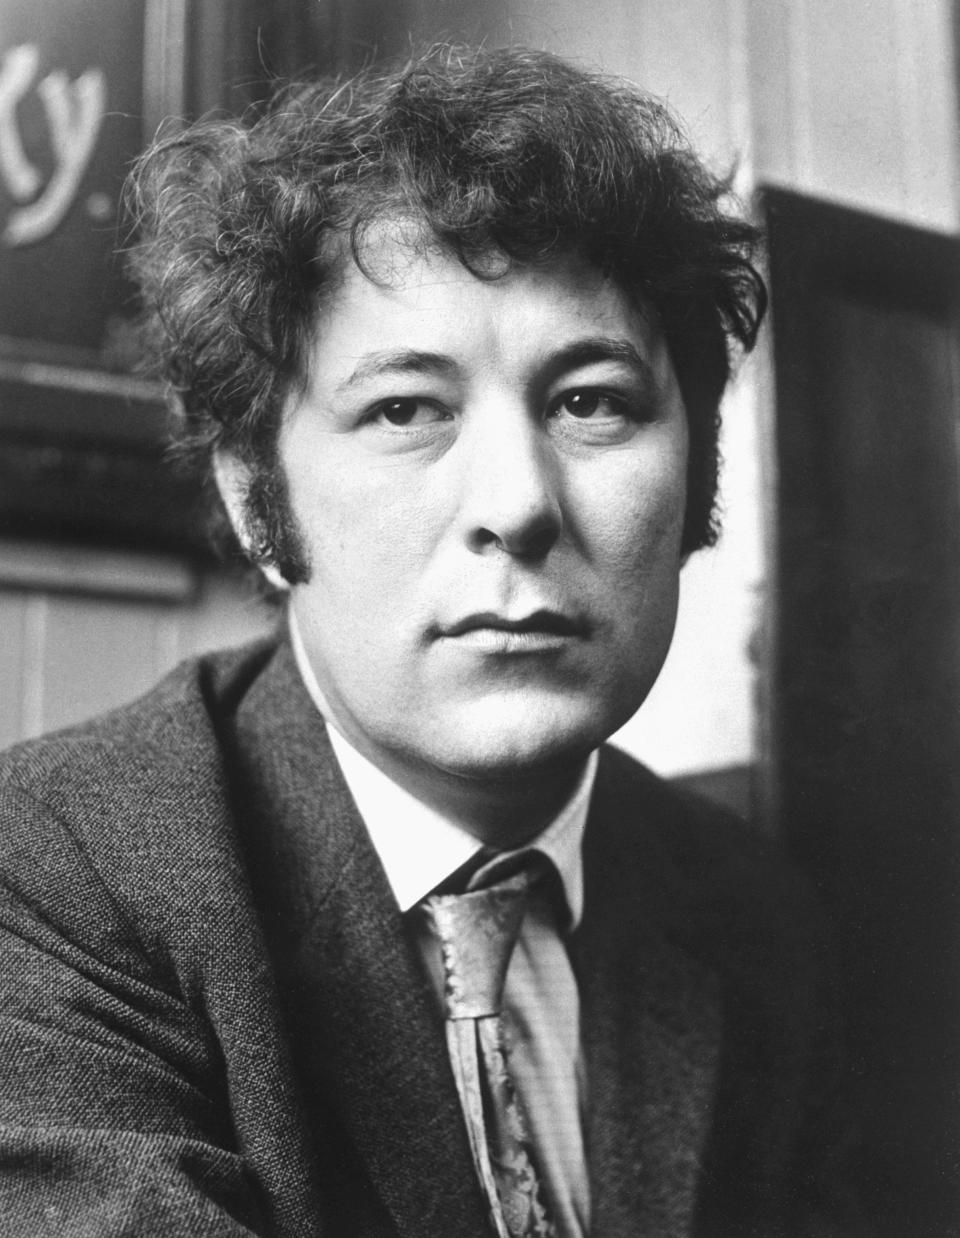 FILE - Irish poet and playwright Seamus Heaney is seen on May 1, 1970. Presidents have long made a point of citing a favorite writer, and for President Joe Biden that often has been Heaney, renowned for what Nobel judges in 1995 called “works of lyrical beauty and ethical depth."(PA via AP, File)